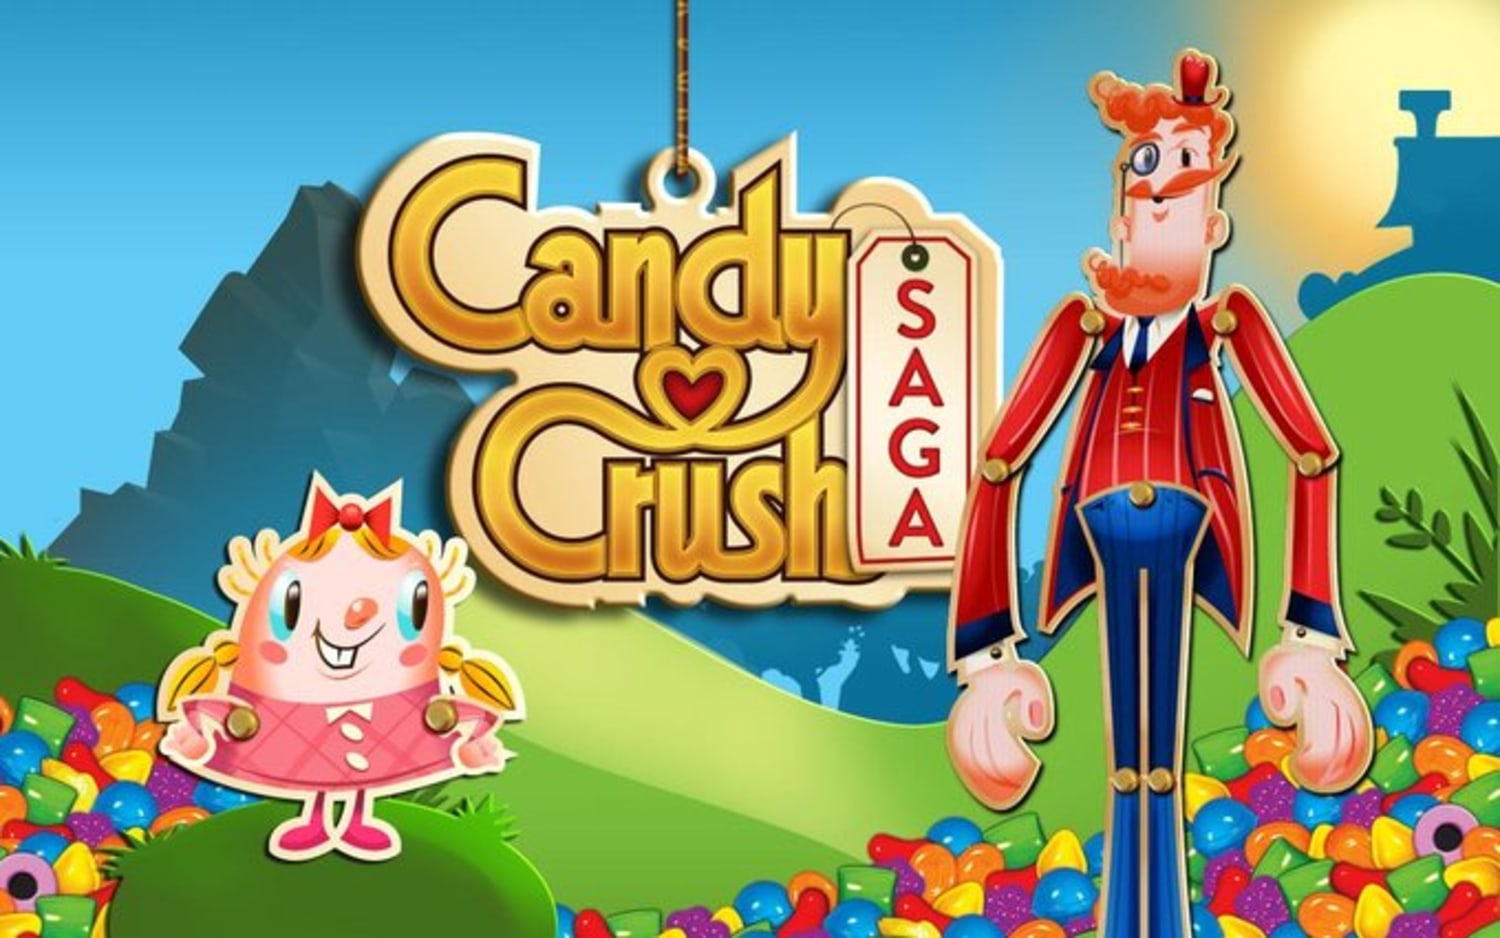 So, Xbox bought Candy Crush for $70 Billion : r/gaming